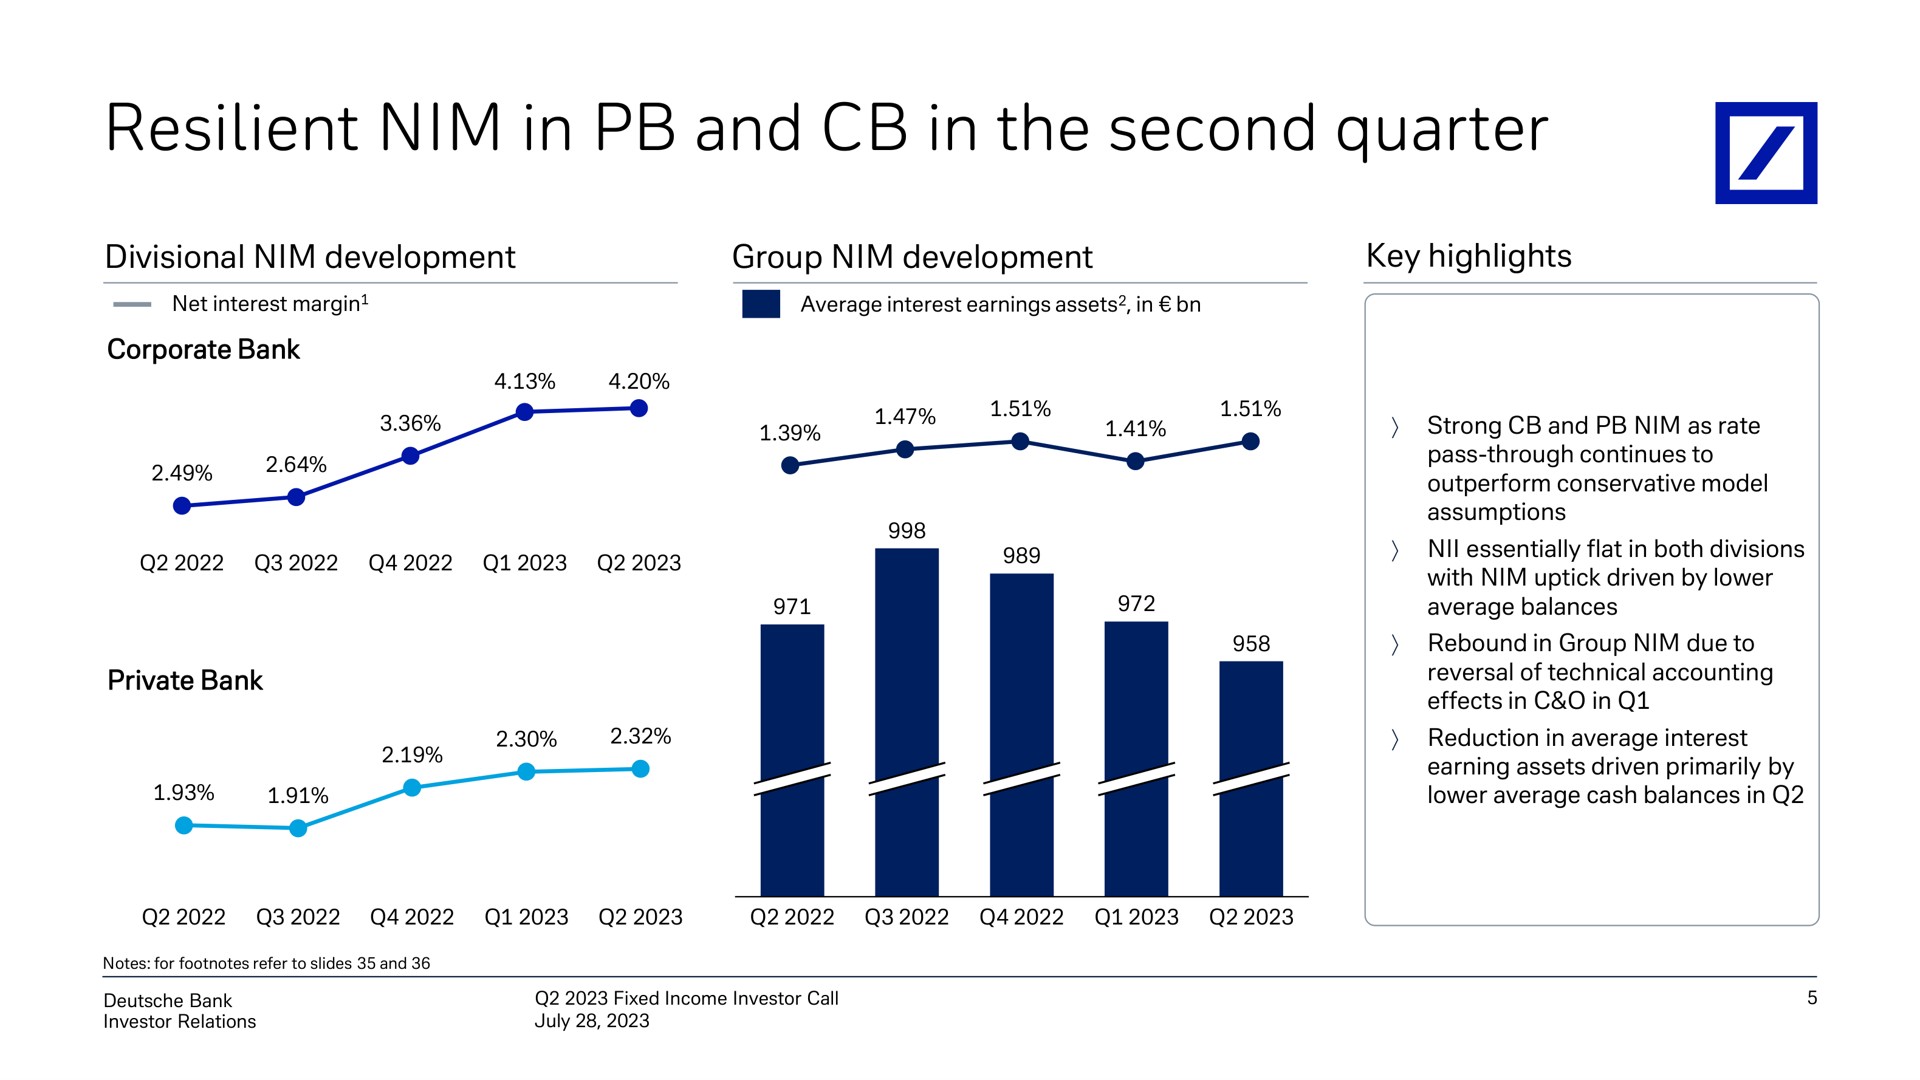 resilient nim in and in the second quarter | Deutsche Bank